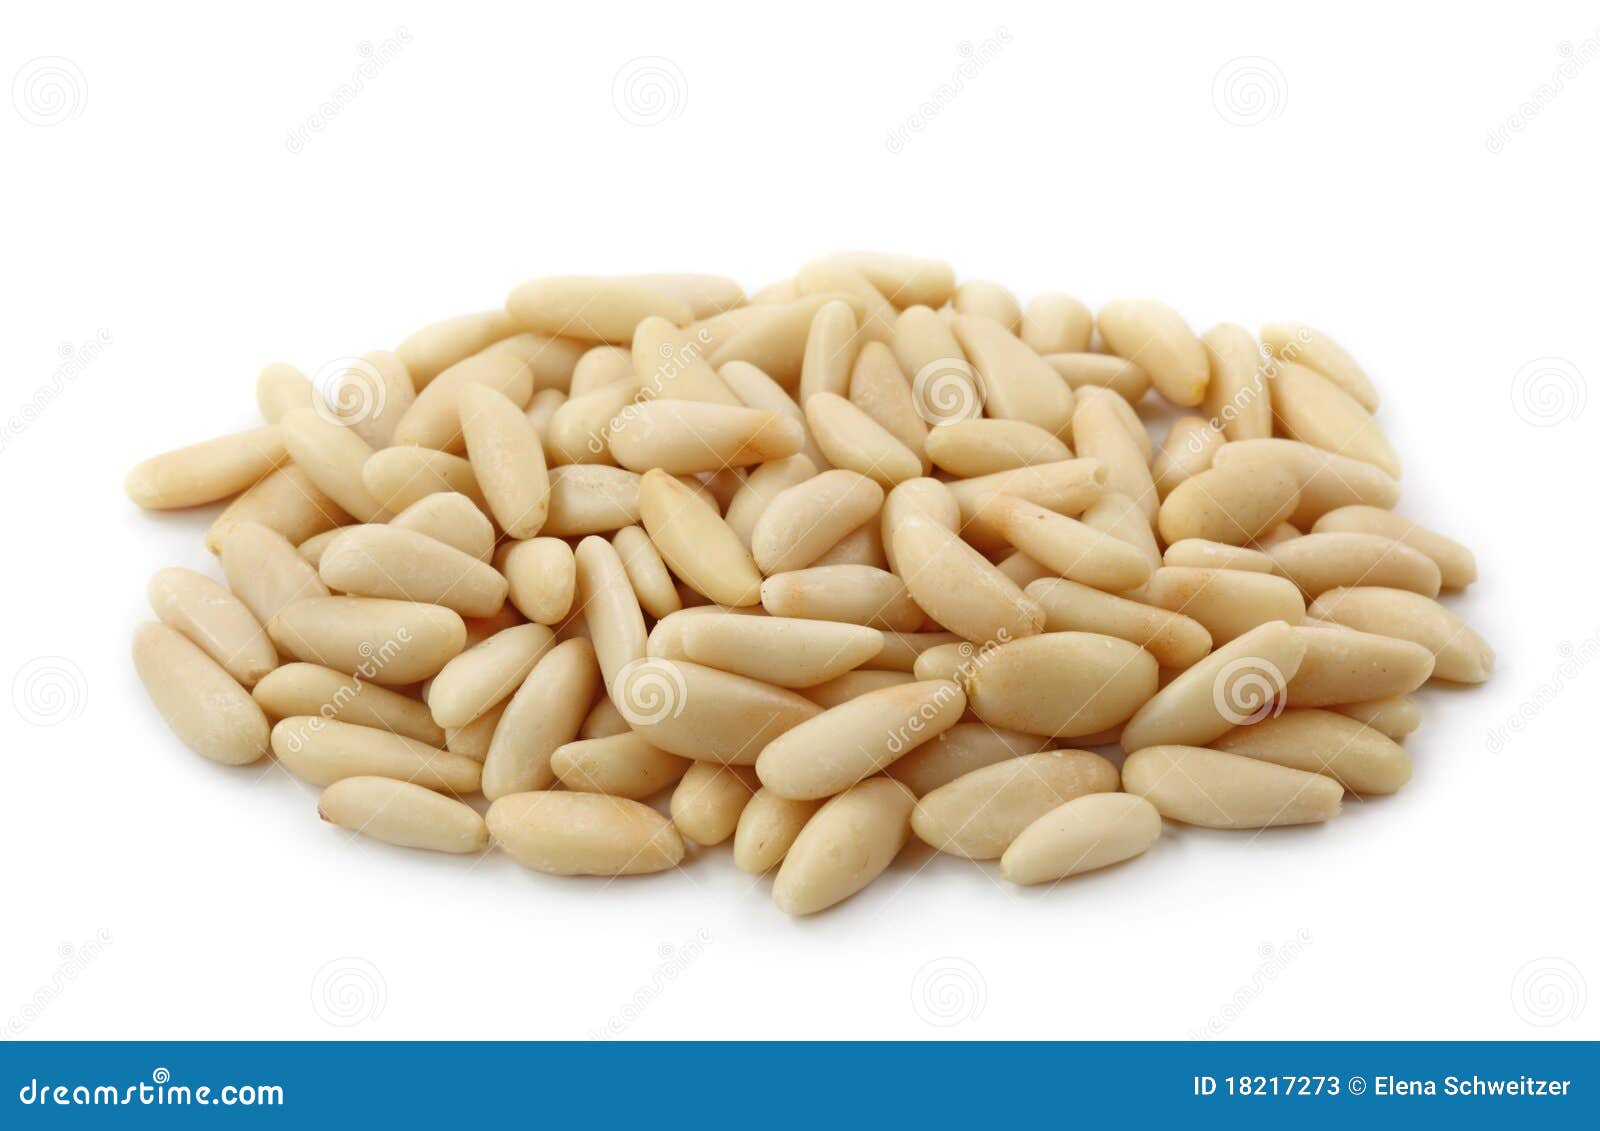 shelled pine nuts